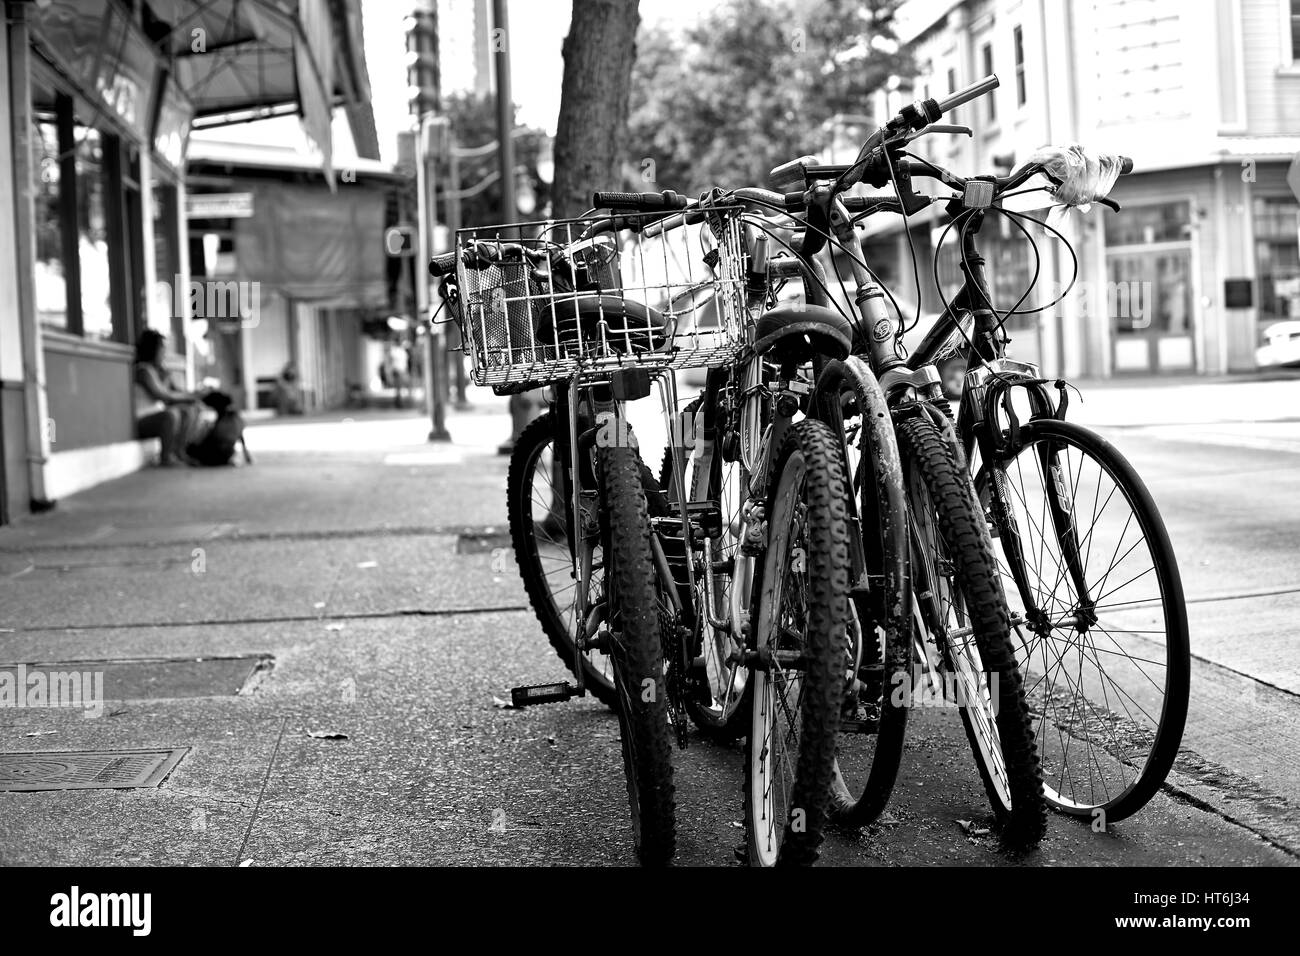 Honolulu, Hawaii - August 6, 2016: A row of locked bicycles on a sidewalk in downtown historic Chinatown. Stock Photo